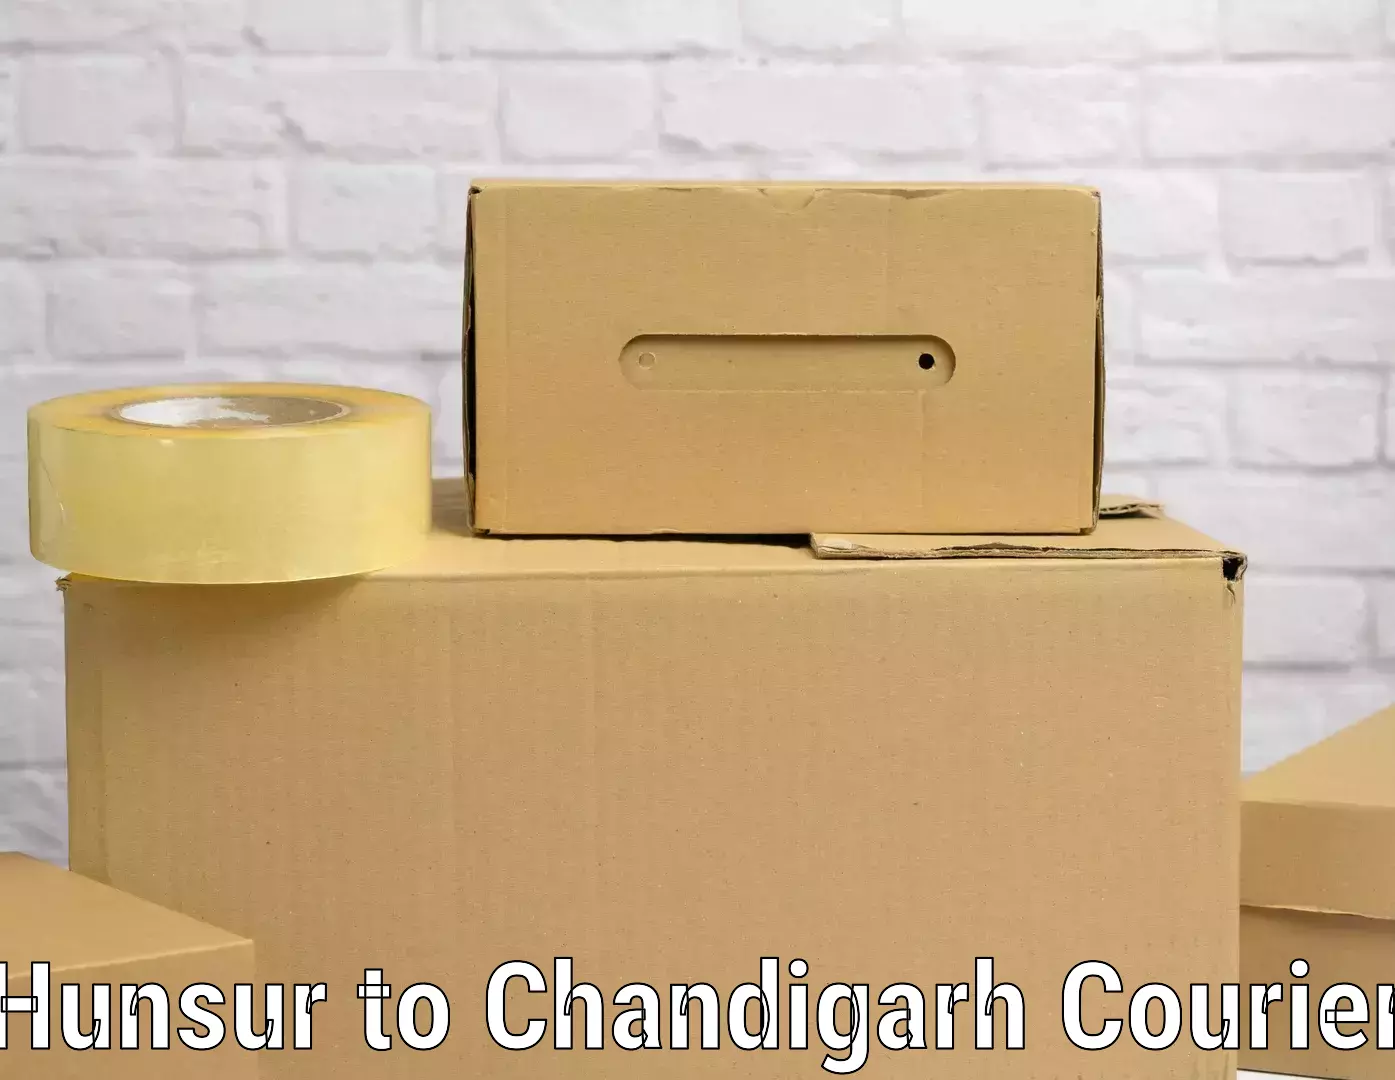 Luggage delivery network Hunsur to Chandigarh